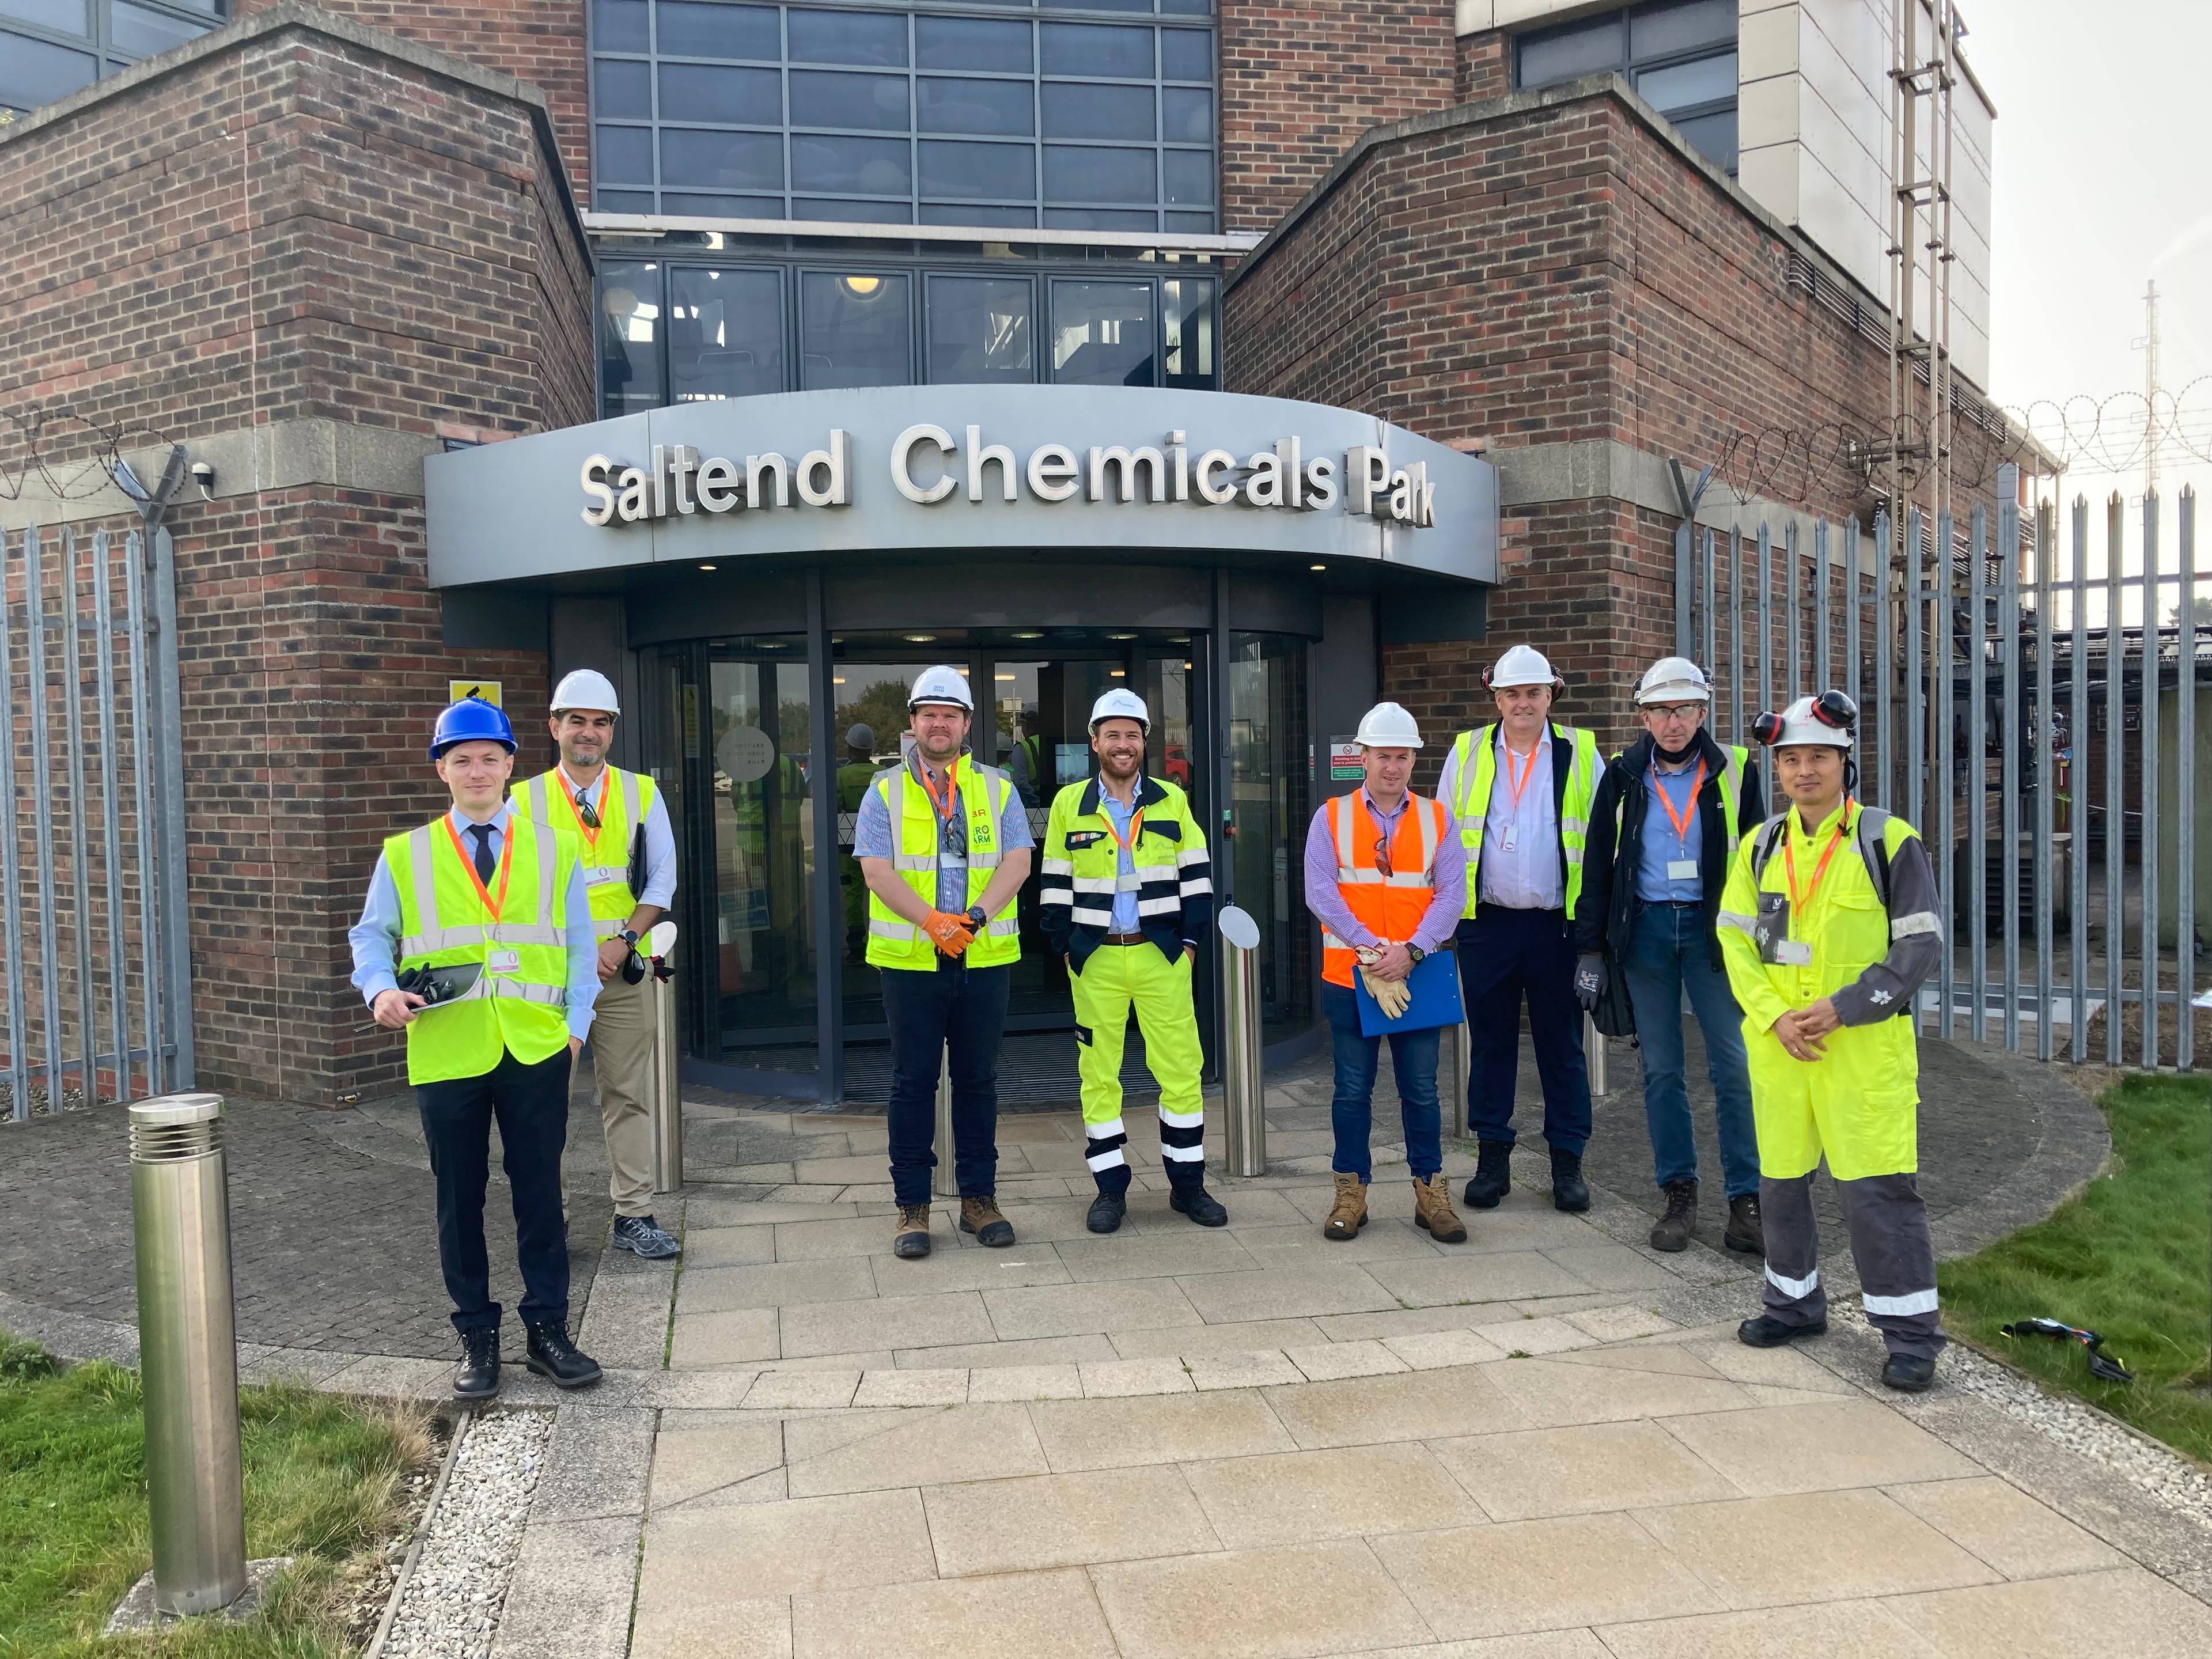 Group photo at the entrance of Saltend Chemicals Park main office